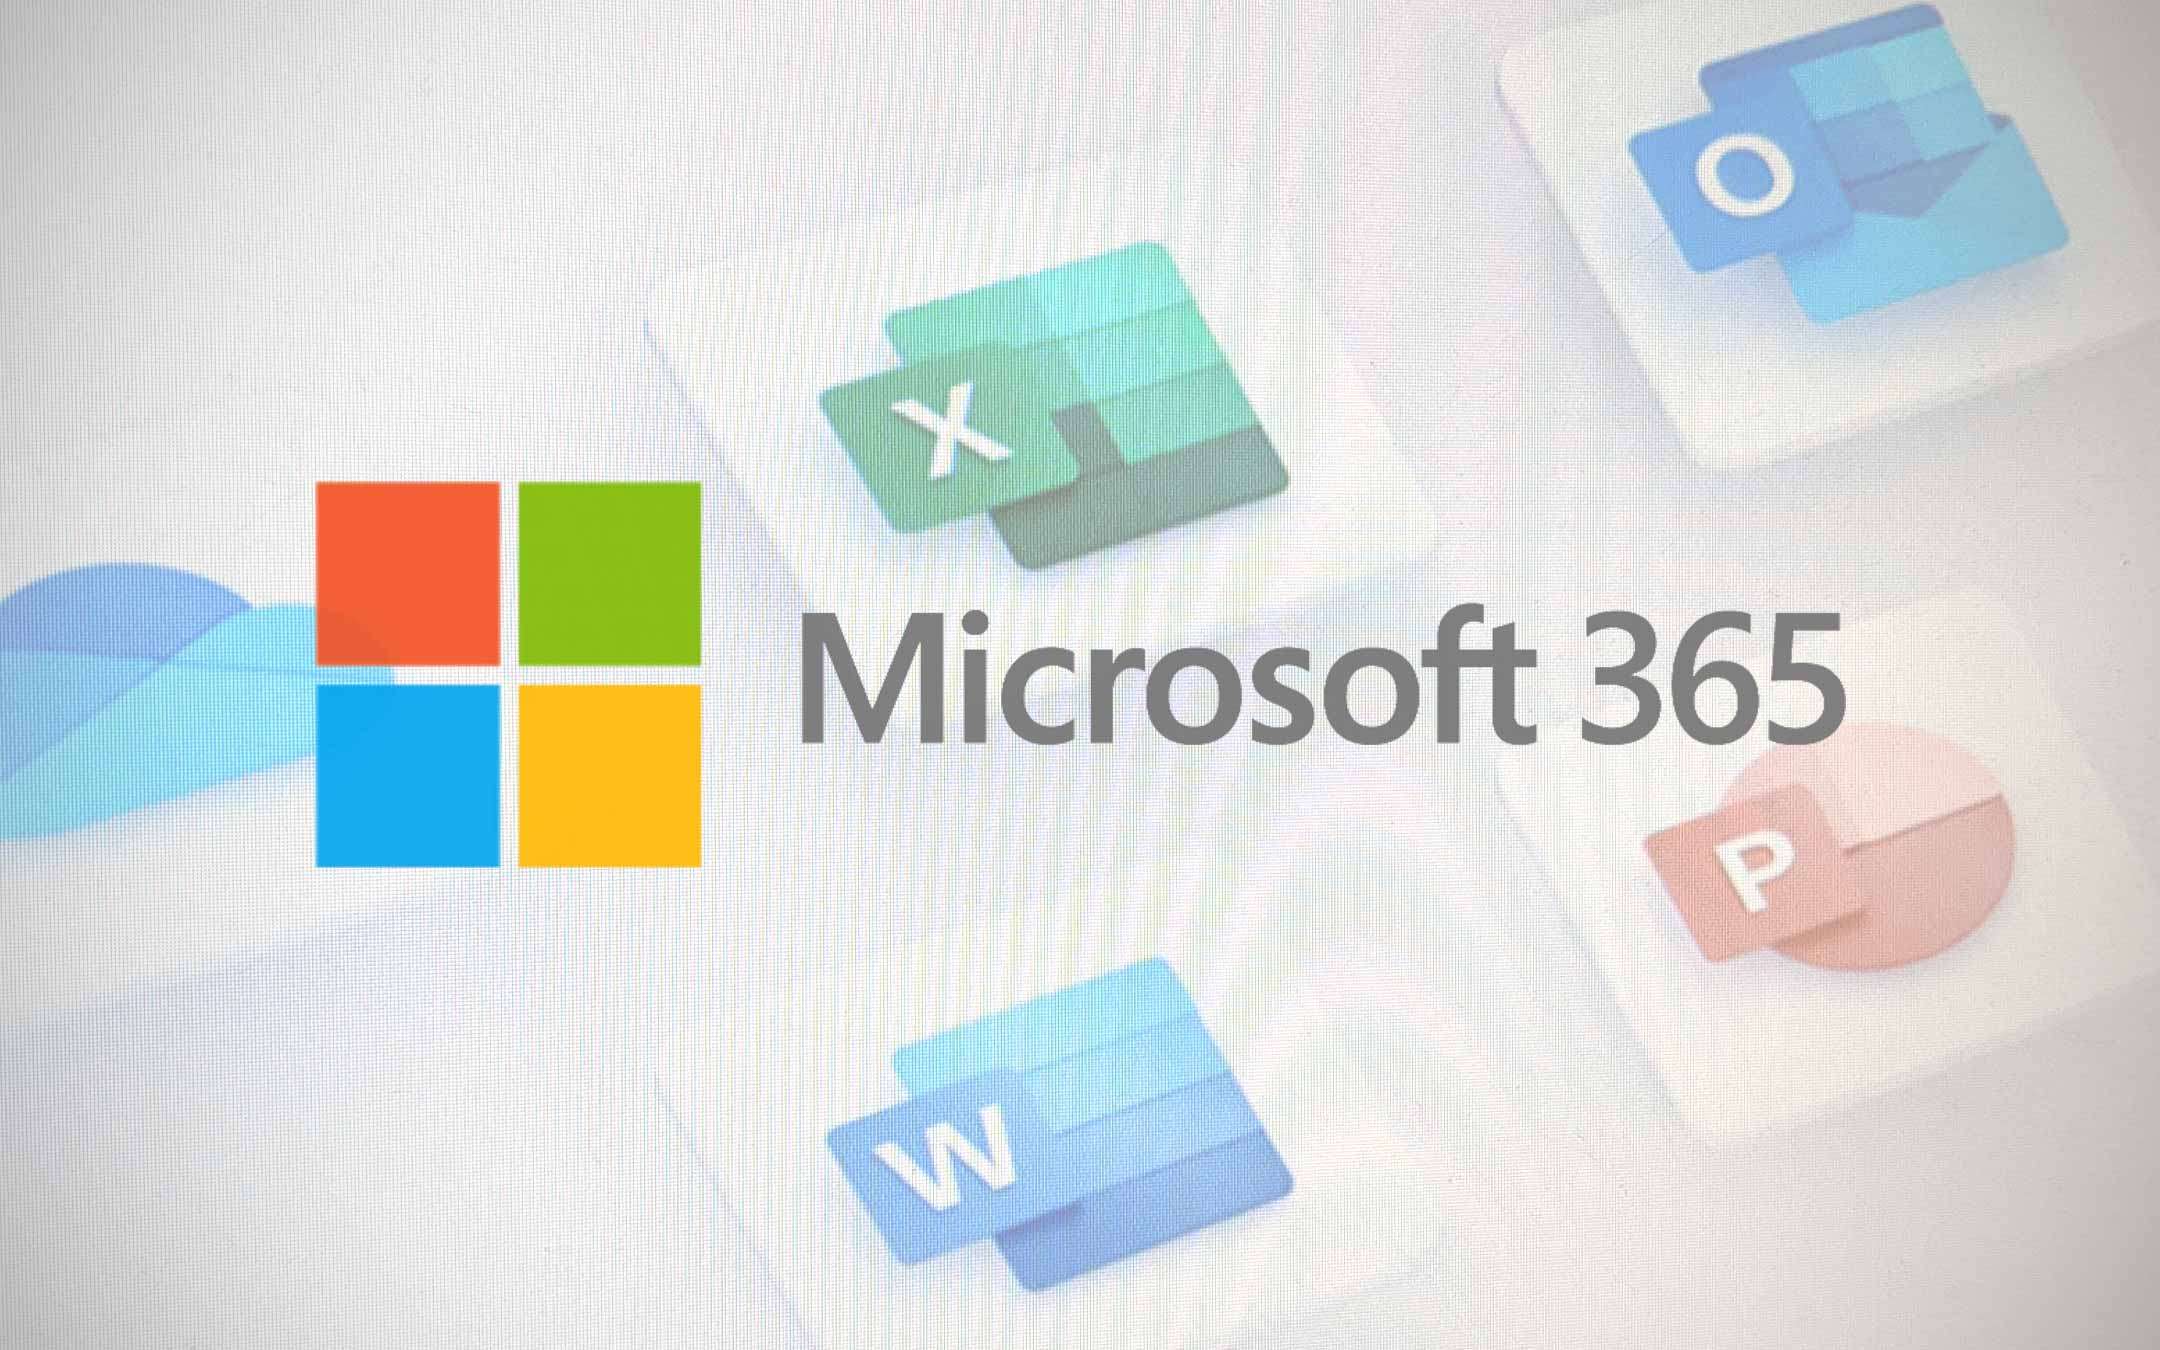 20 euro discount on Microsoft 365 Personal